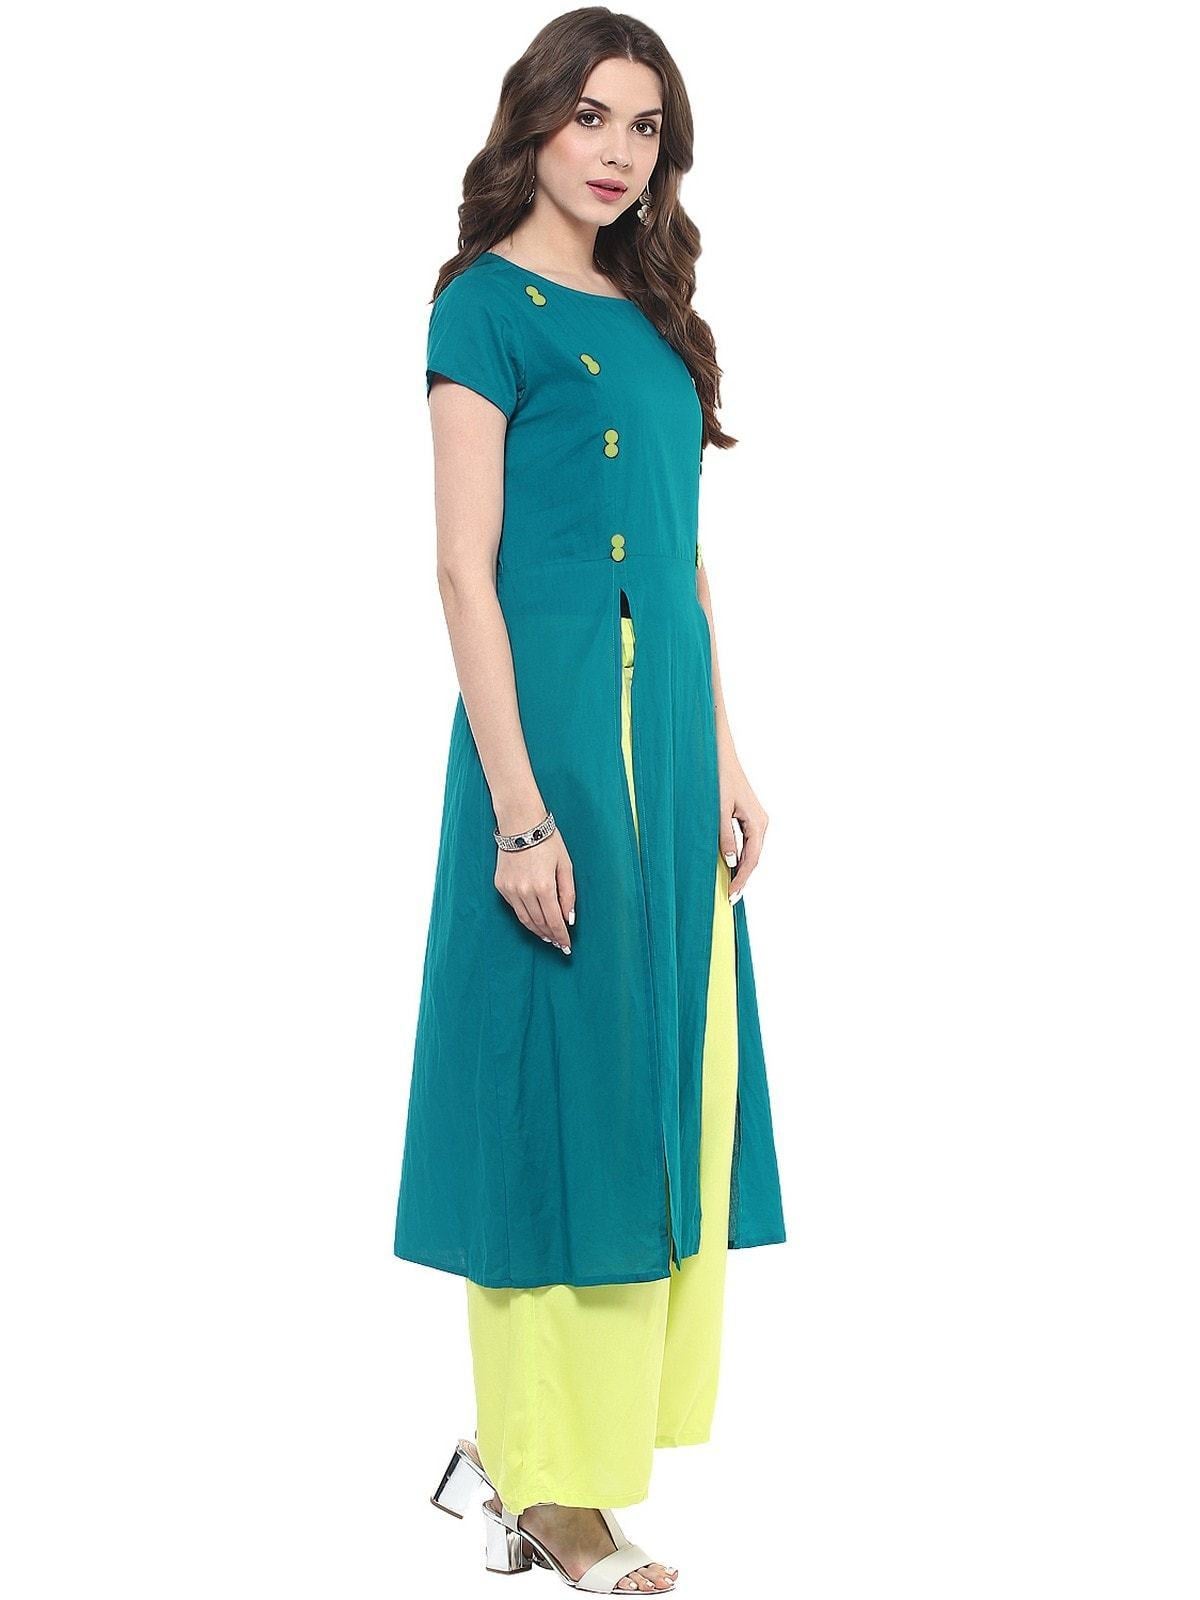 Women's Solid Kurti With Panelled Buttons - Pannkh